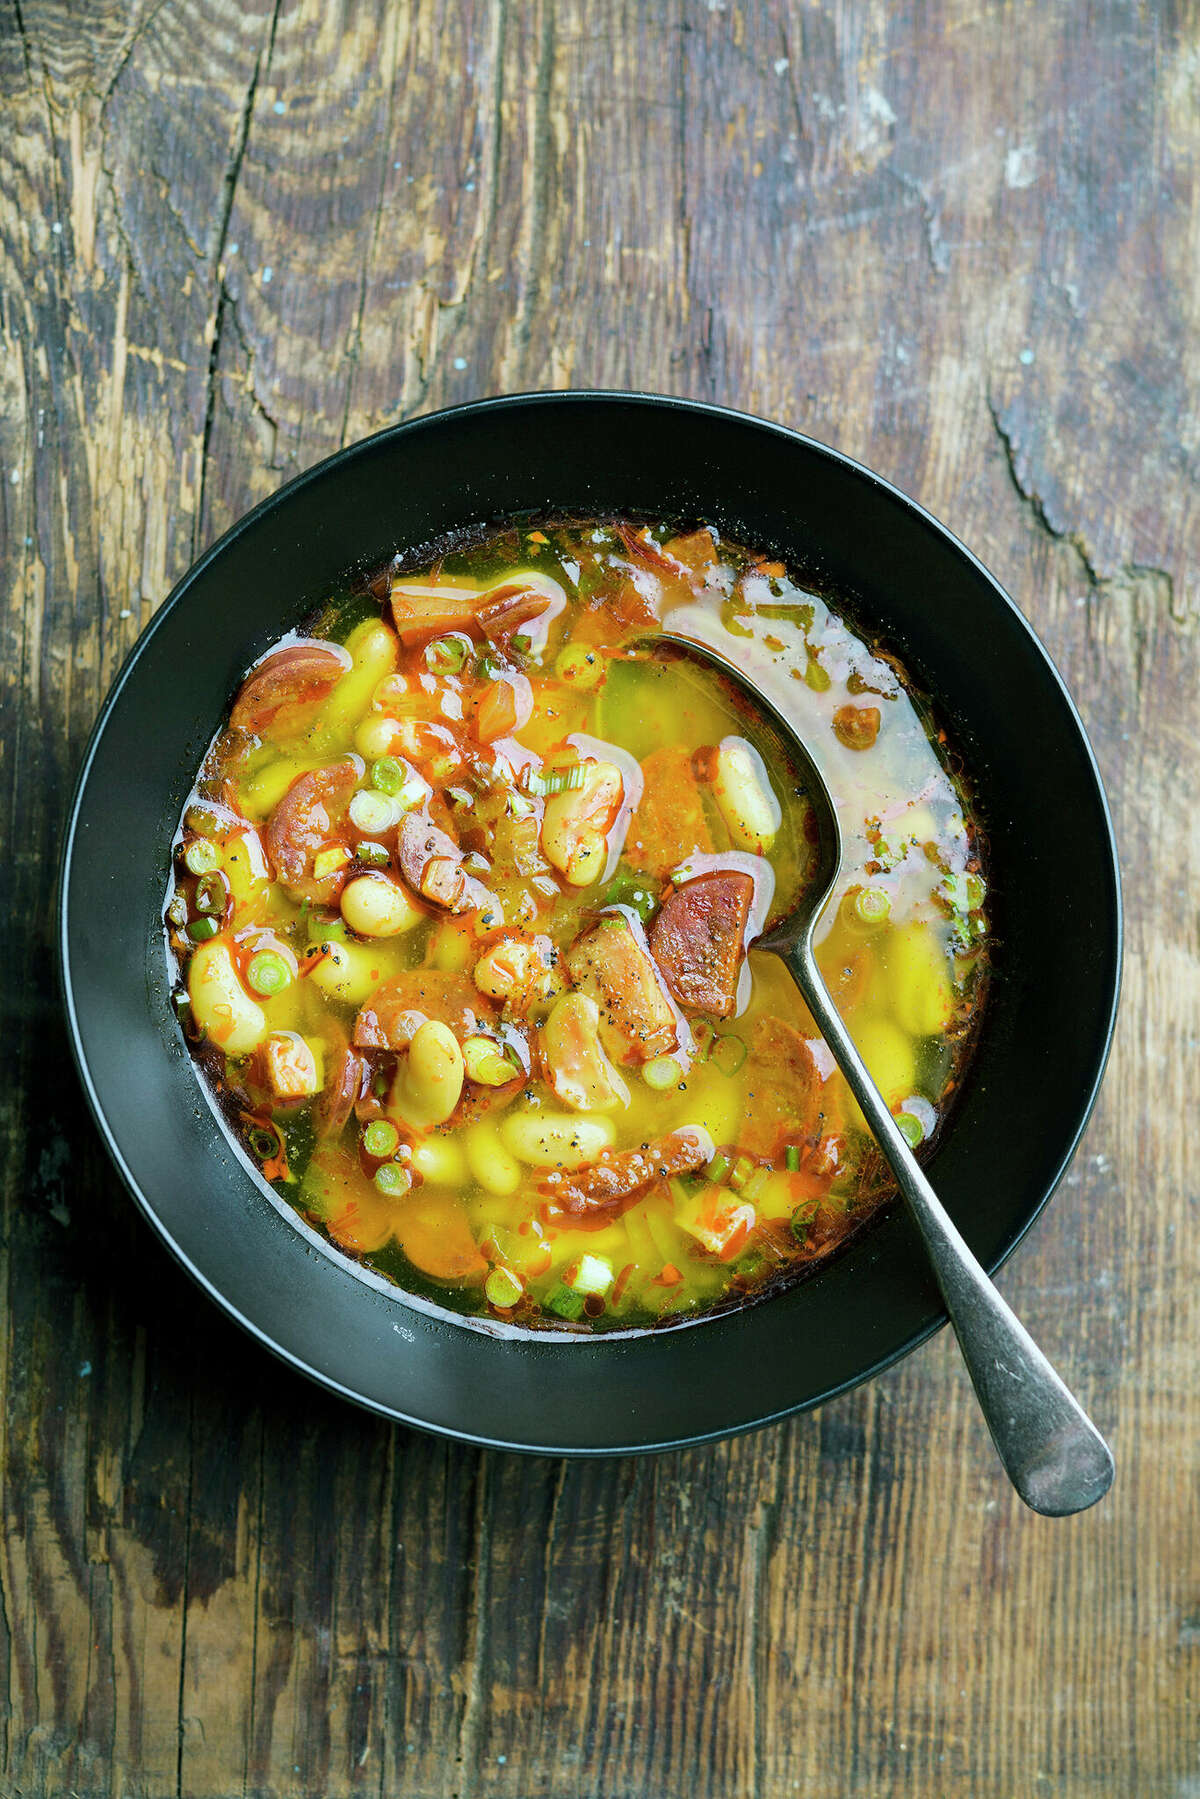 Spanish Chorizo, Ham and White Bean Stew is a satisfying, stick-to-your-ribs meal during colder months.